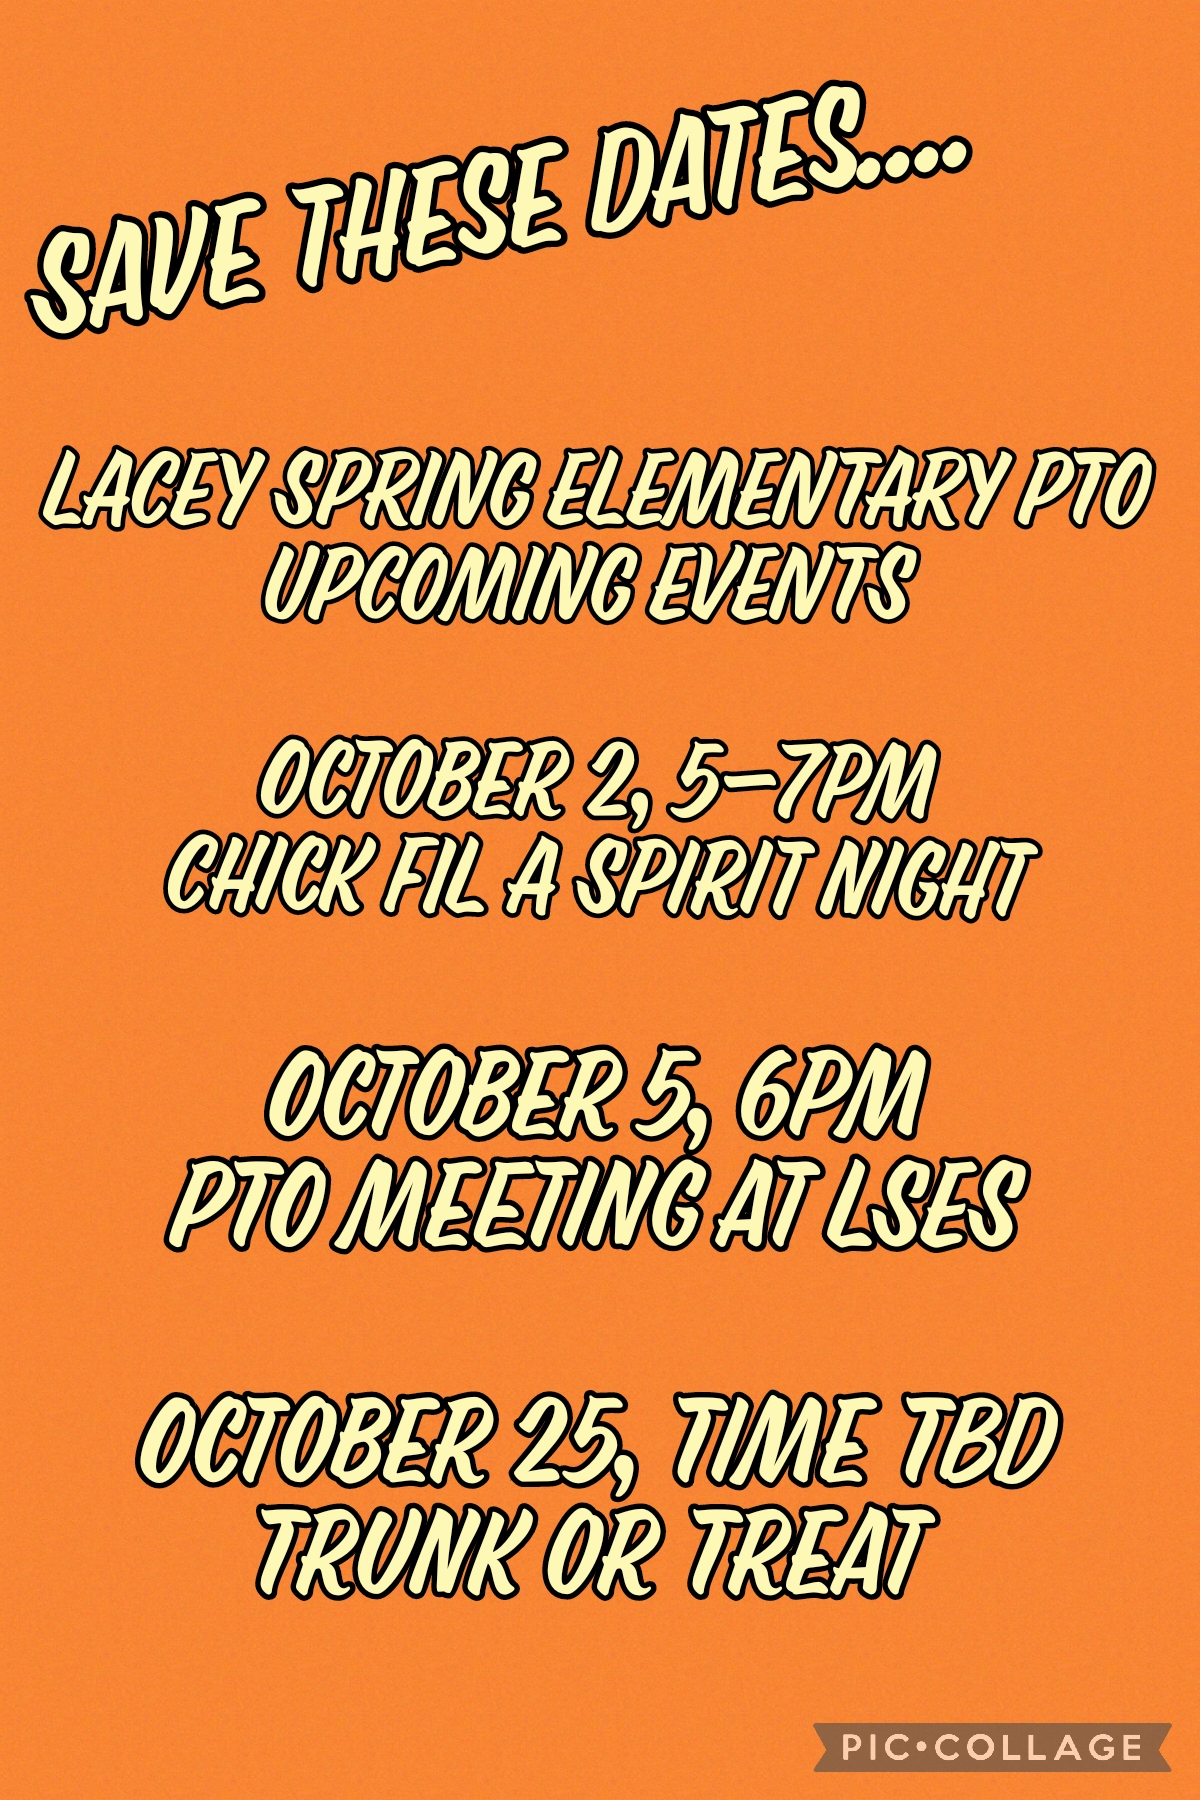 PTO upcoming events